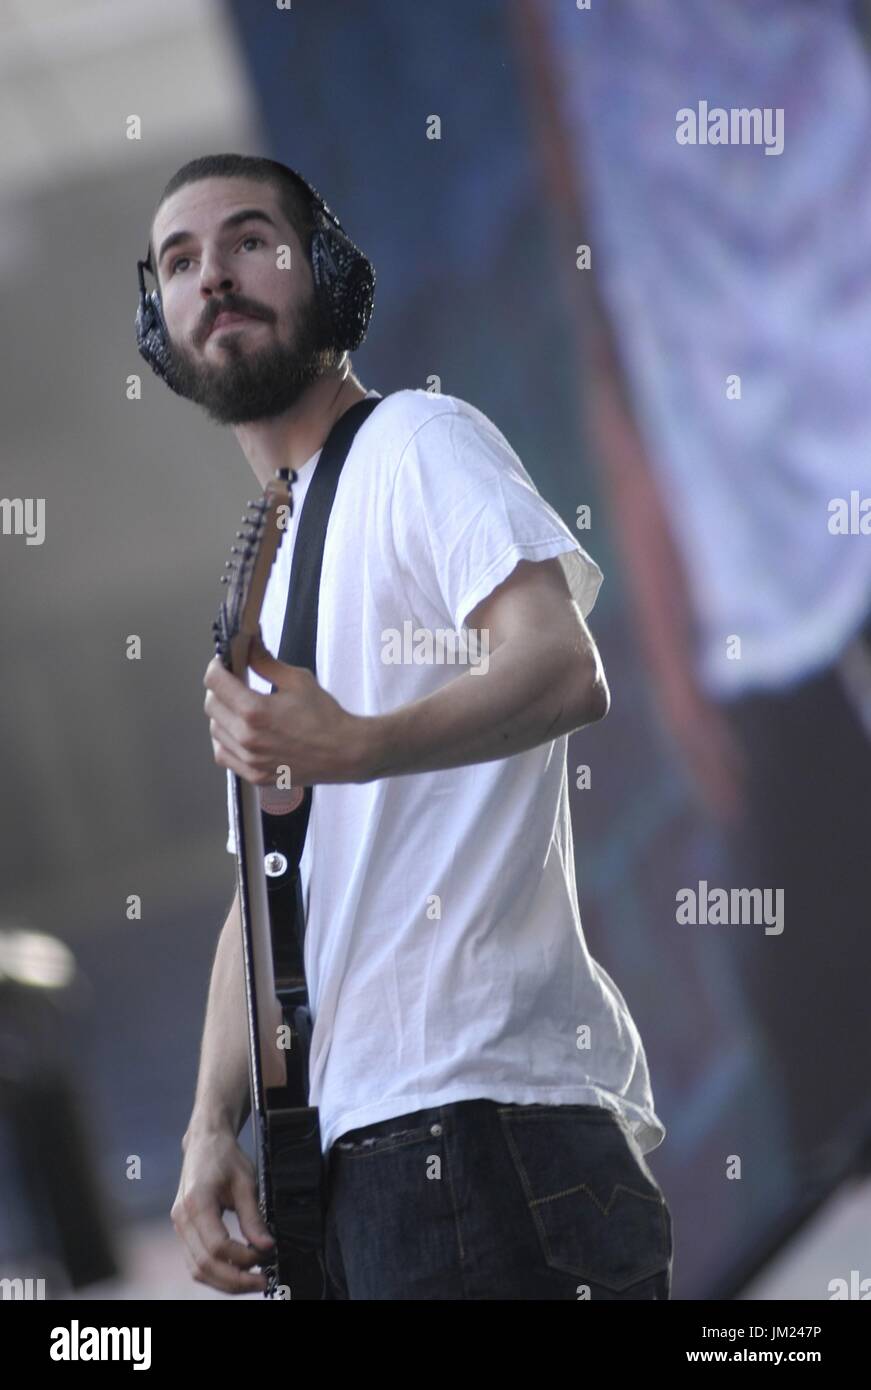 New York, NY, USA. 25th July, 2017. Brad Delson, Linkin Park in concert at Giants Stadium, East Rutherford, NJ, July 8, 2003 retrospective for Chester Bennington of Linkin Park Retrospective, New York, NY July 25, 2017. Credit: Kristin Callahan/Everett Collection/Alamy Live News Stock Photo